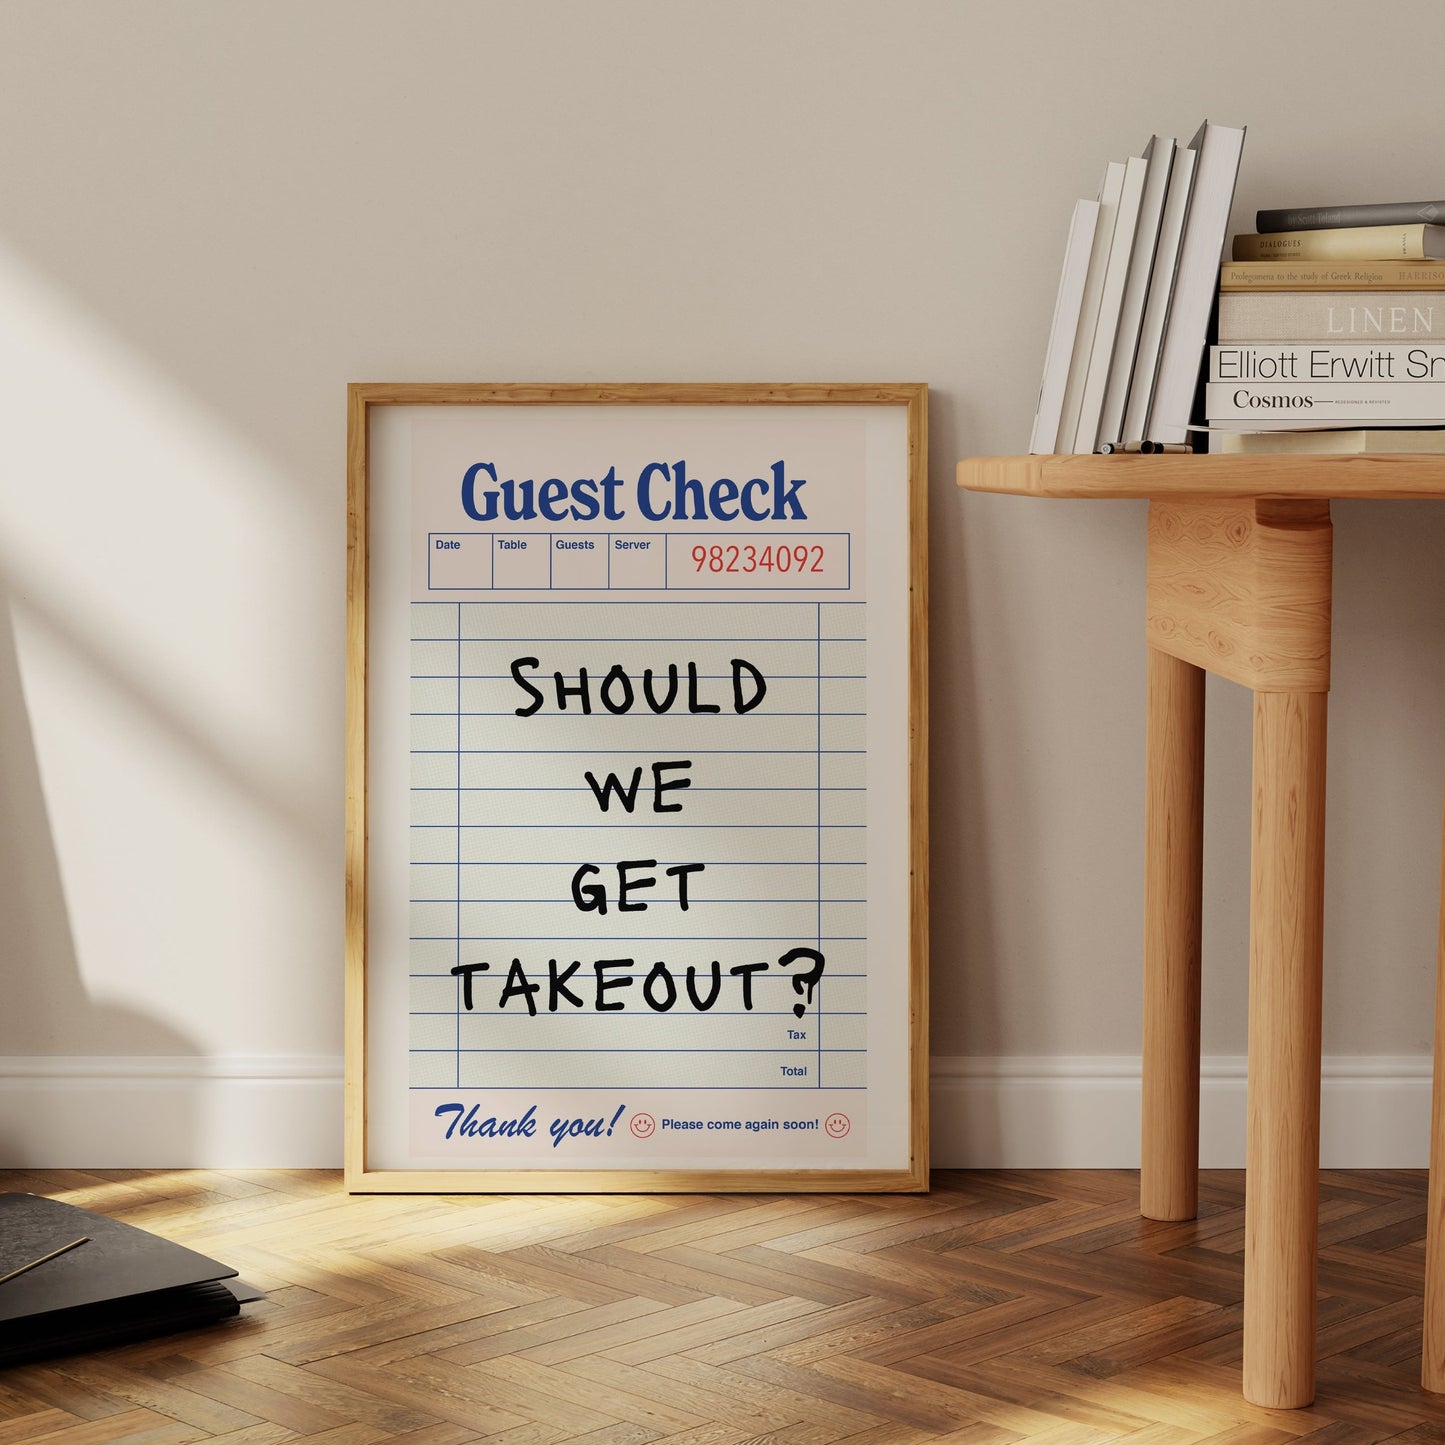 Should We Get Takeout? - Guest Check Poster